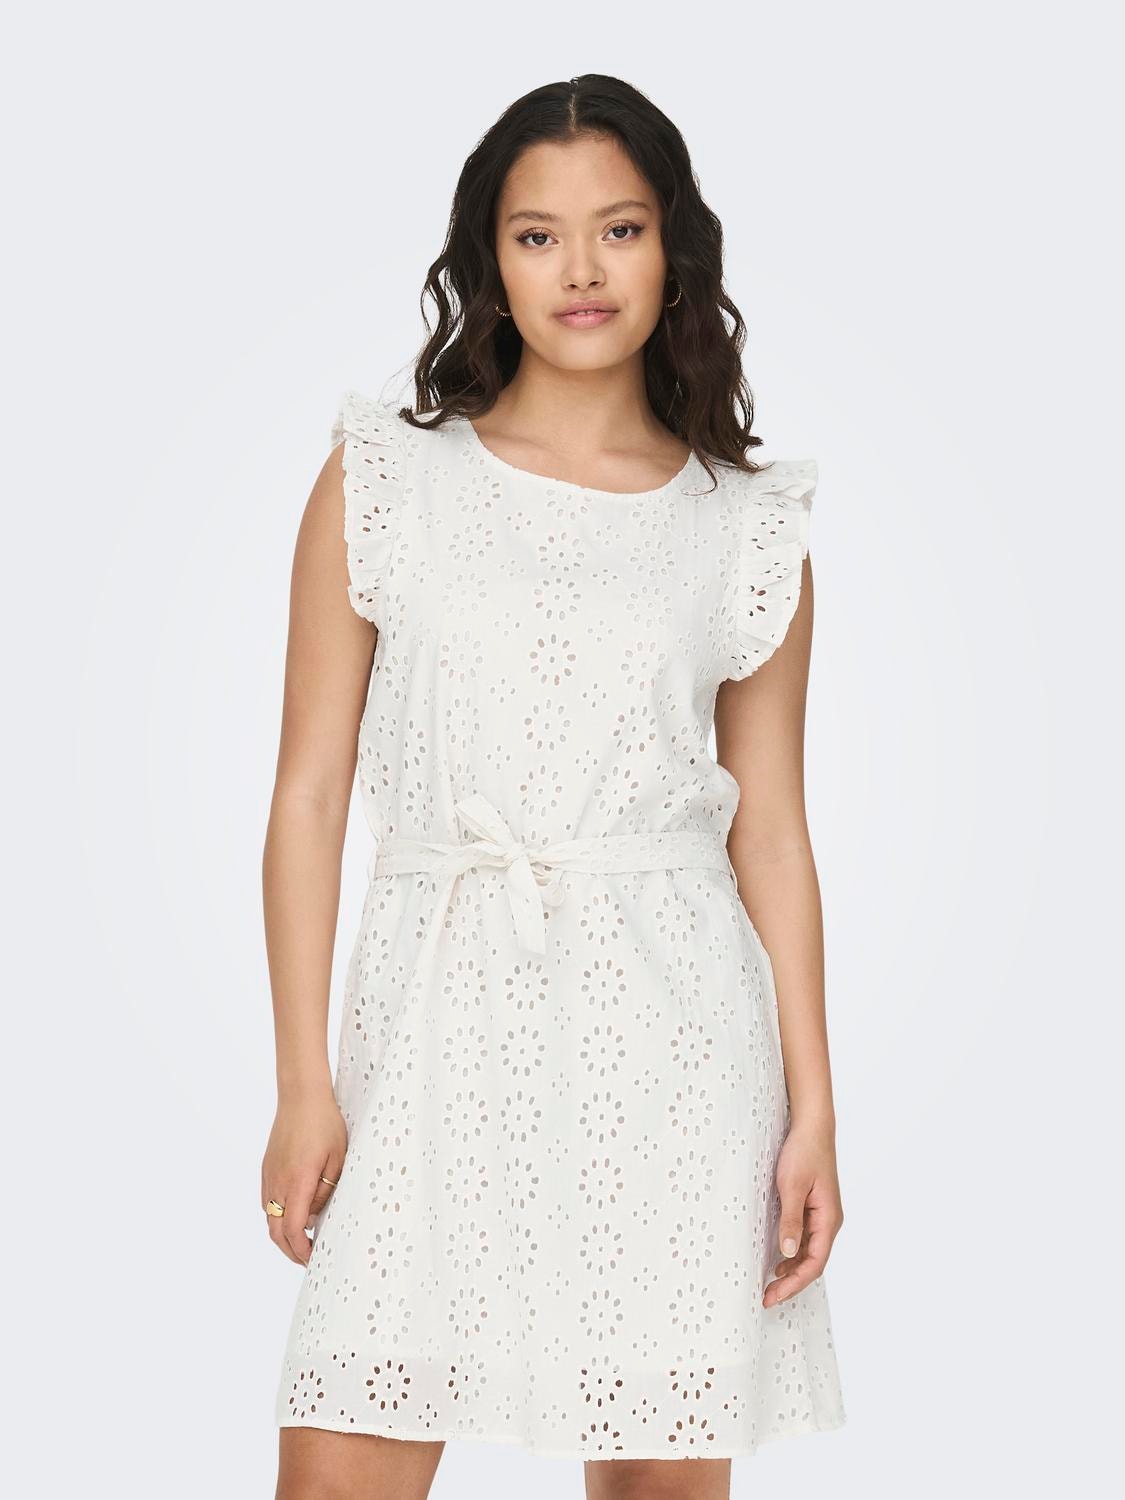 ONLY Embroidery anglaise dress -Cloud Dancer - 15312384